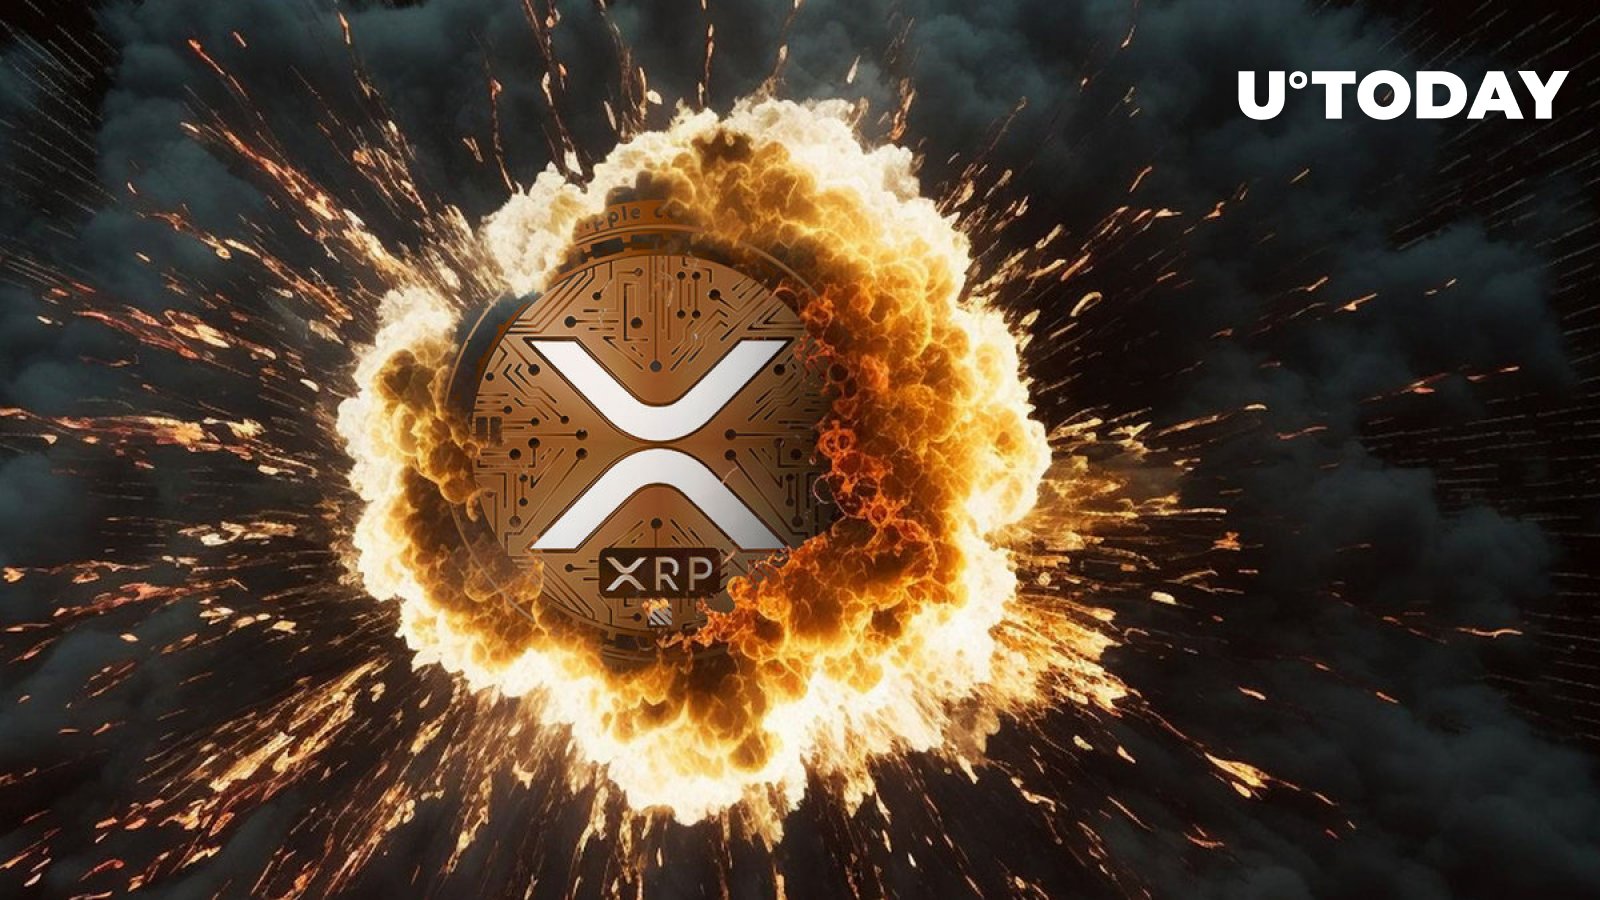 XRP Might Explode Soon, According to Moving Averages